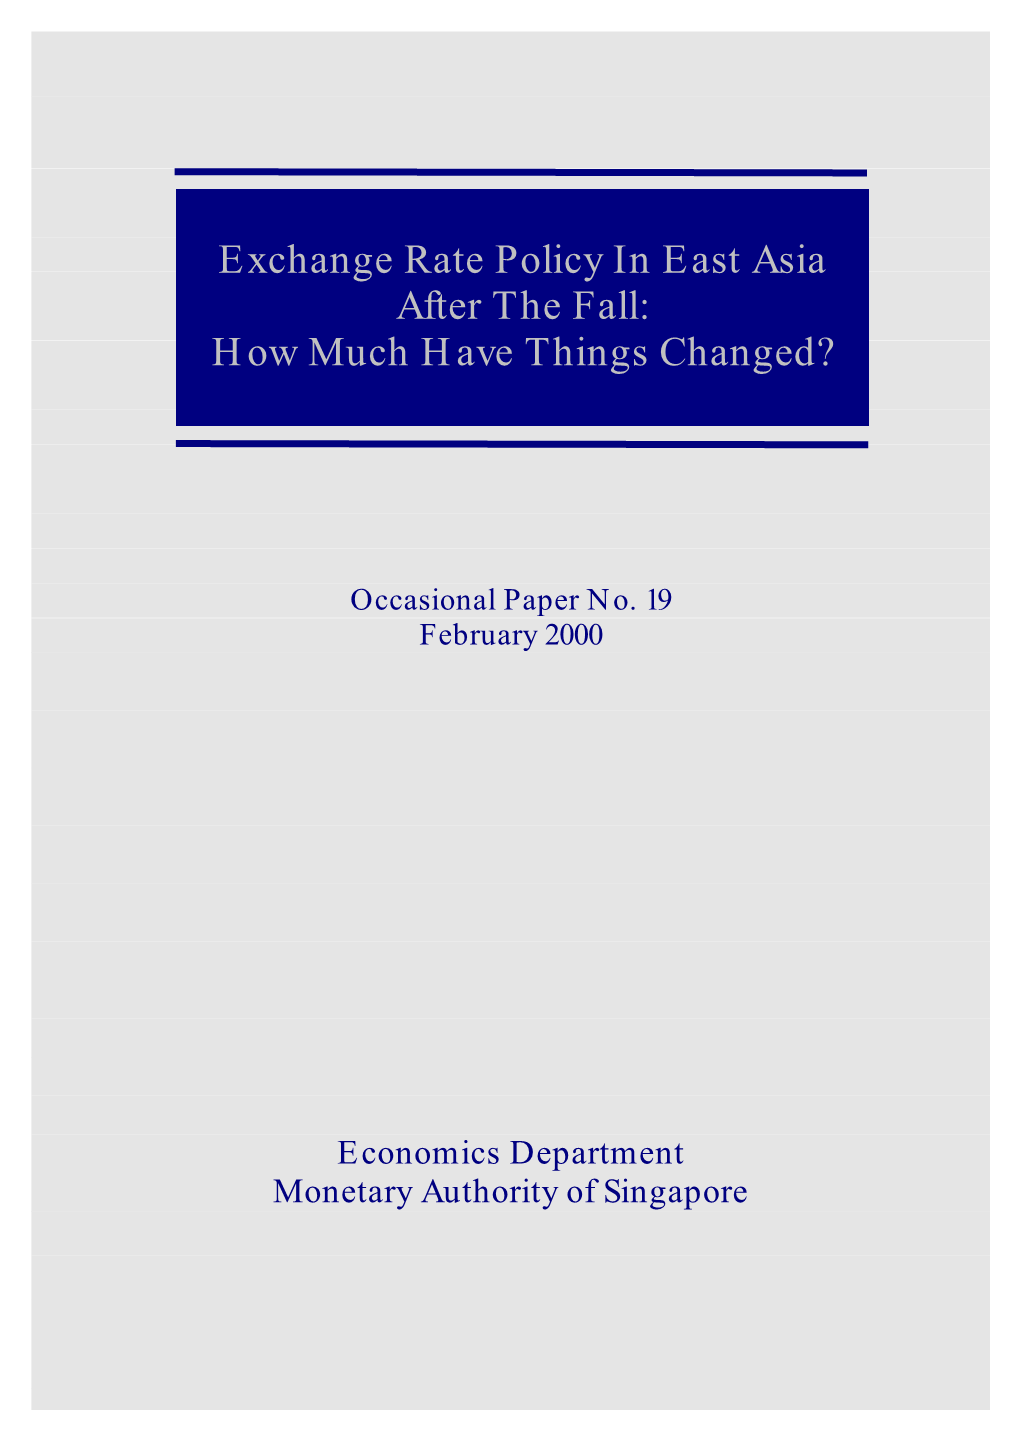 Exchange Rate Policy in East Asia After the Fall: How Much Have Things Changed?